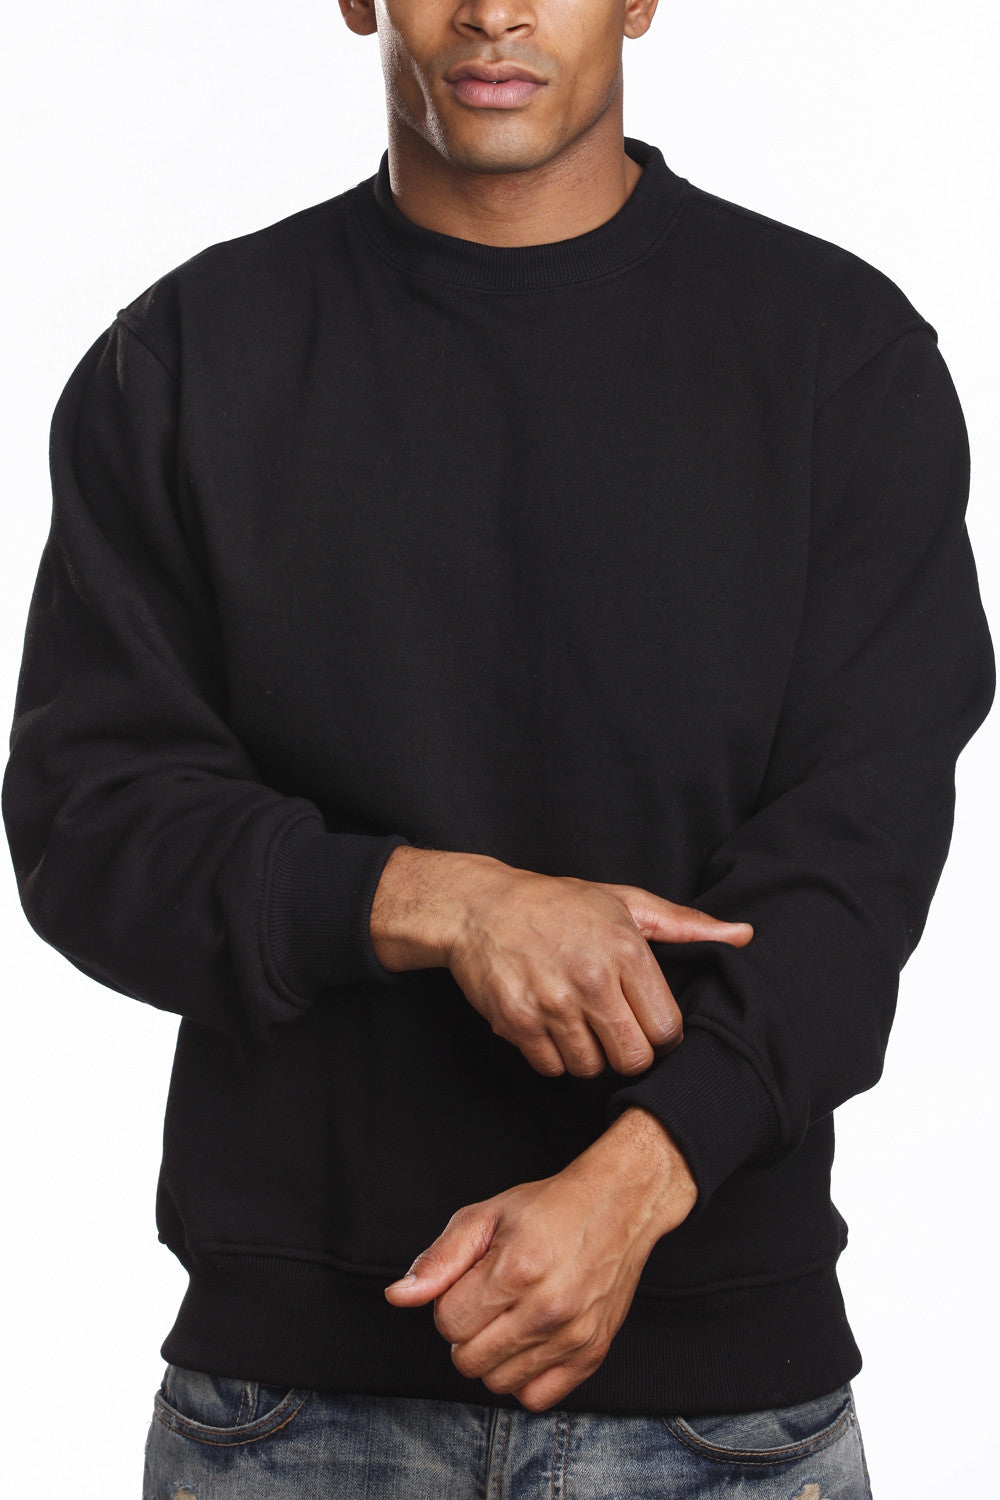 Fleece Crew Neck Black Sweatshirt: Elevate comfort with Pro 5 style. Sturdy, heavy-weight. Sizes S-XL. Classic colors. 60% Cotton 40% Polyester blend. Size tip: Choose one size smaller for snug fit.